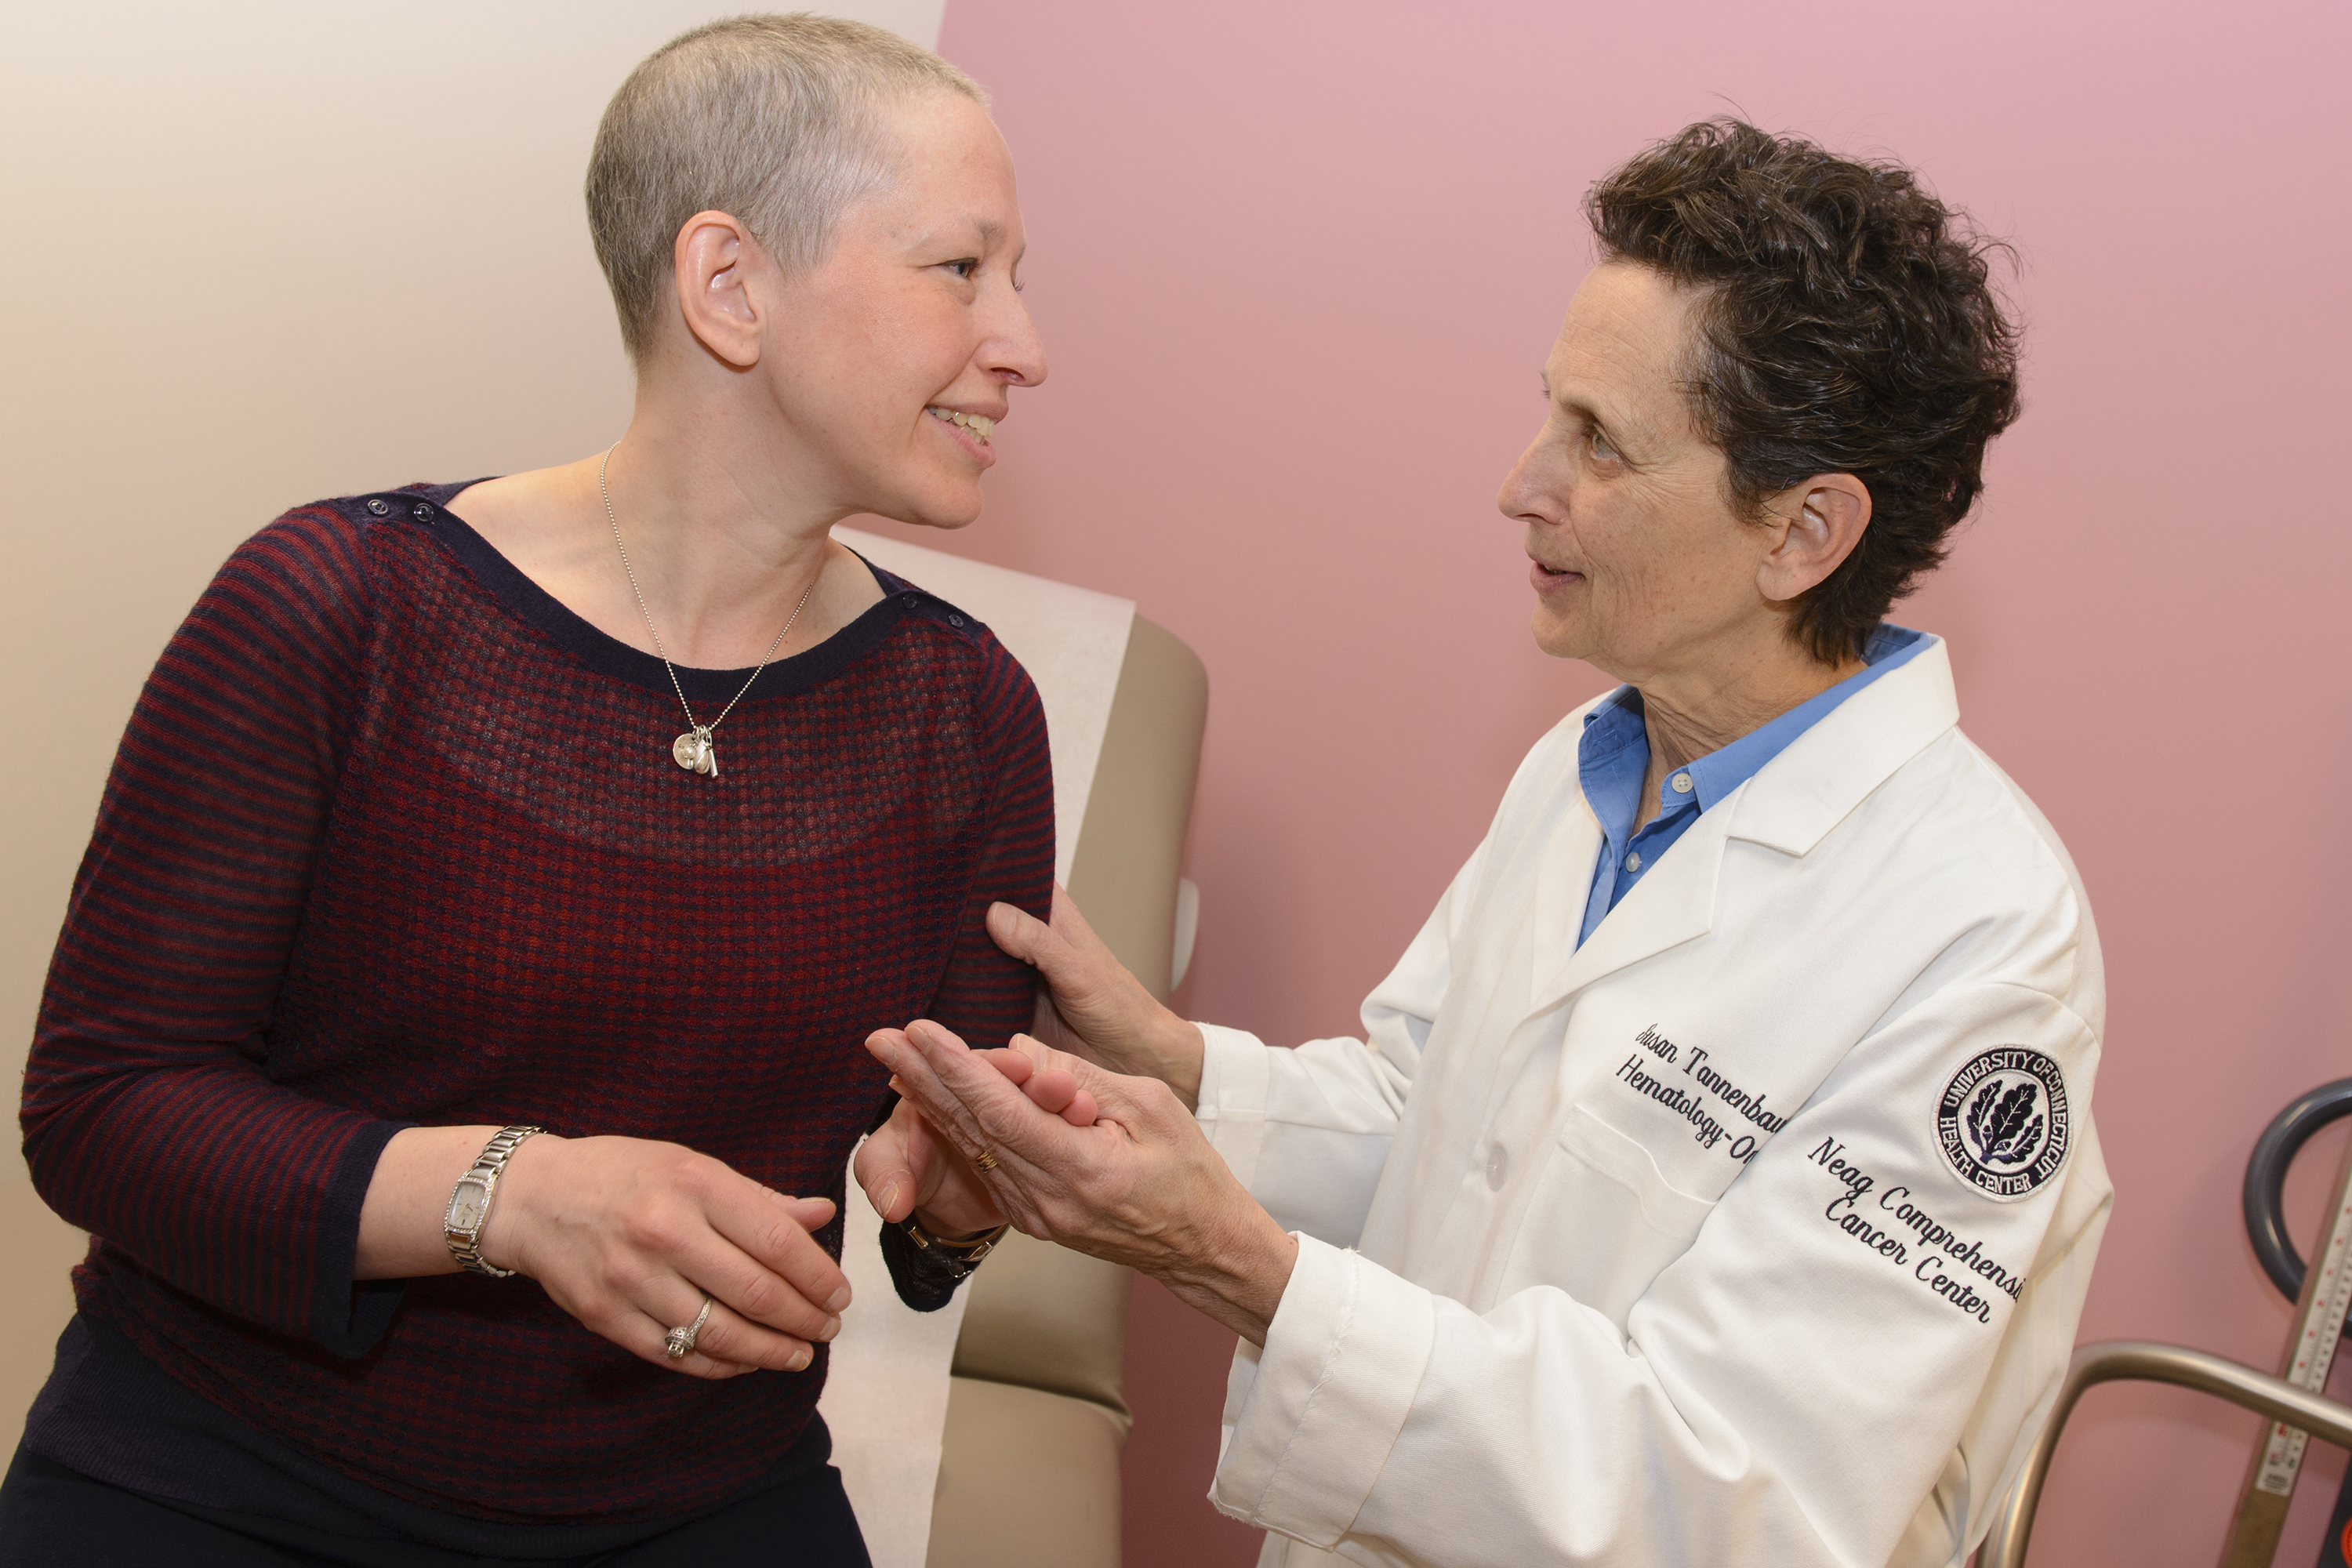 Cancer specialist Dr. Susan Tannenbaum with patient Elizabeth Johnston at UConn Health's Carole and Ray Neag Comprehensive Cancer Center. (Janine Gelineau/UConn Health Photo)